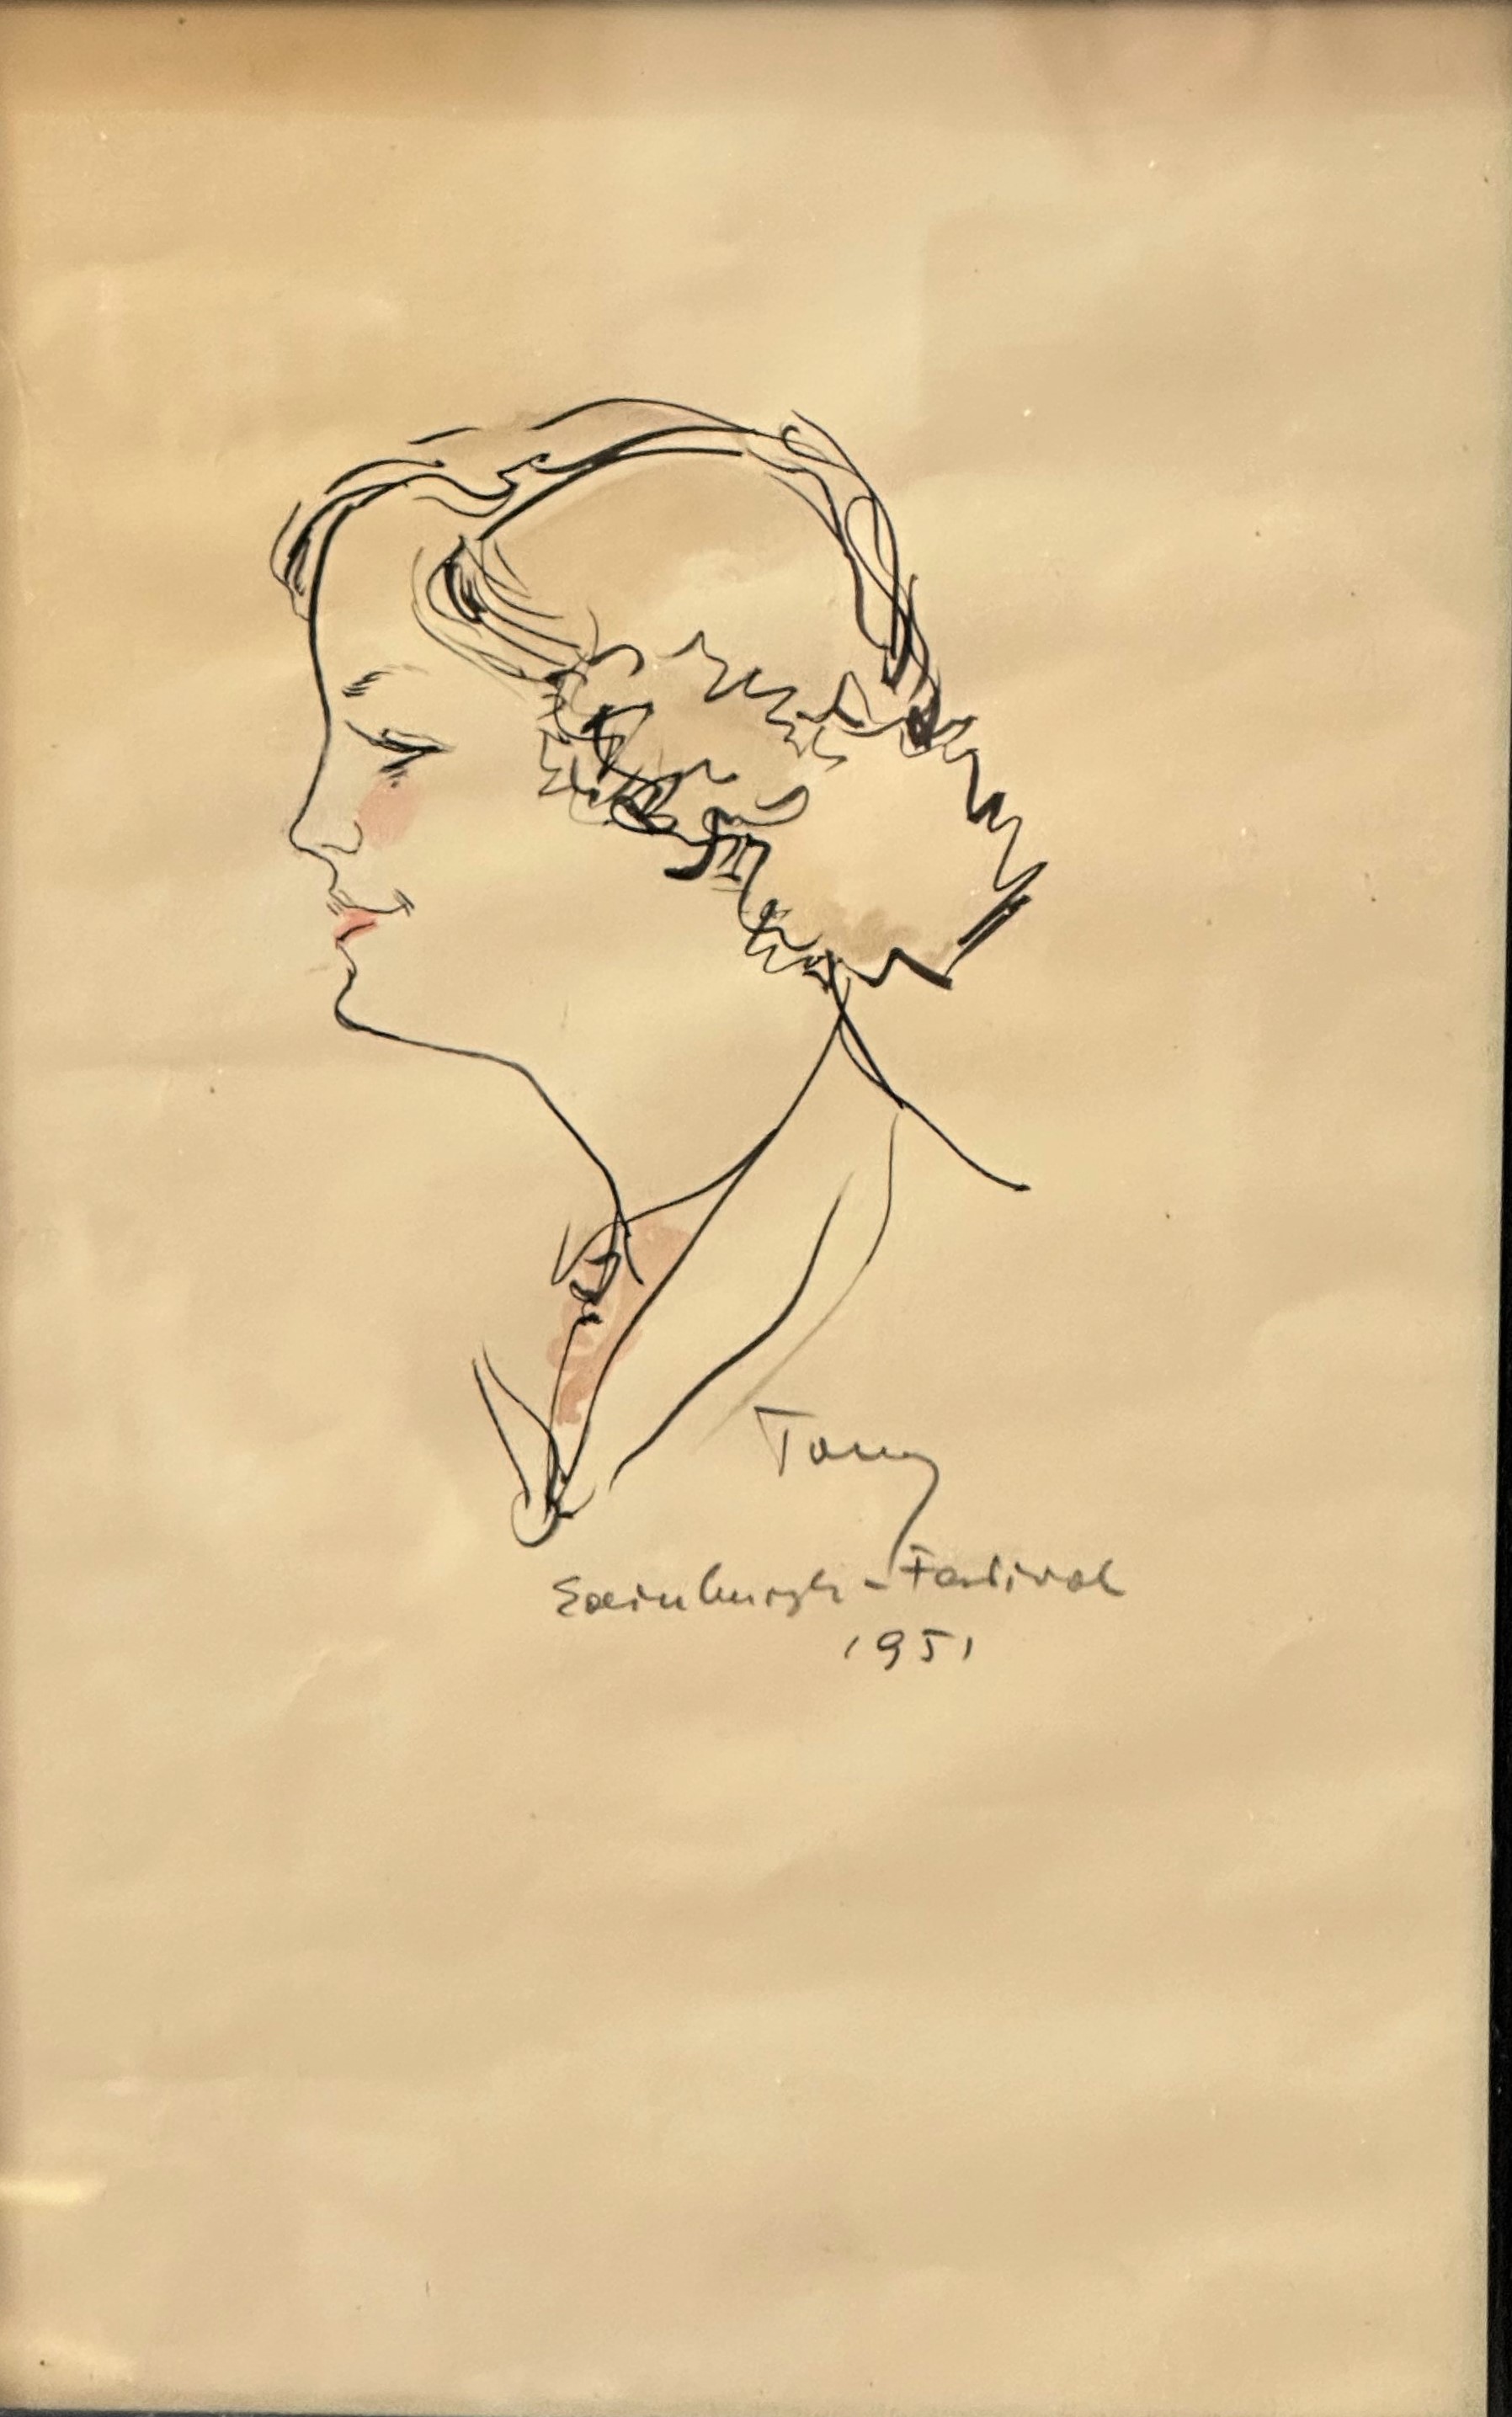 Tally, Edinburgh Festival 1951, pen and ink profile sketch highlighted with colour, (27cm x 17cm)